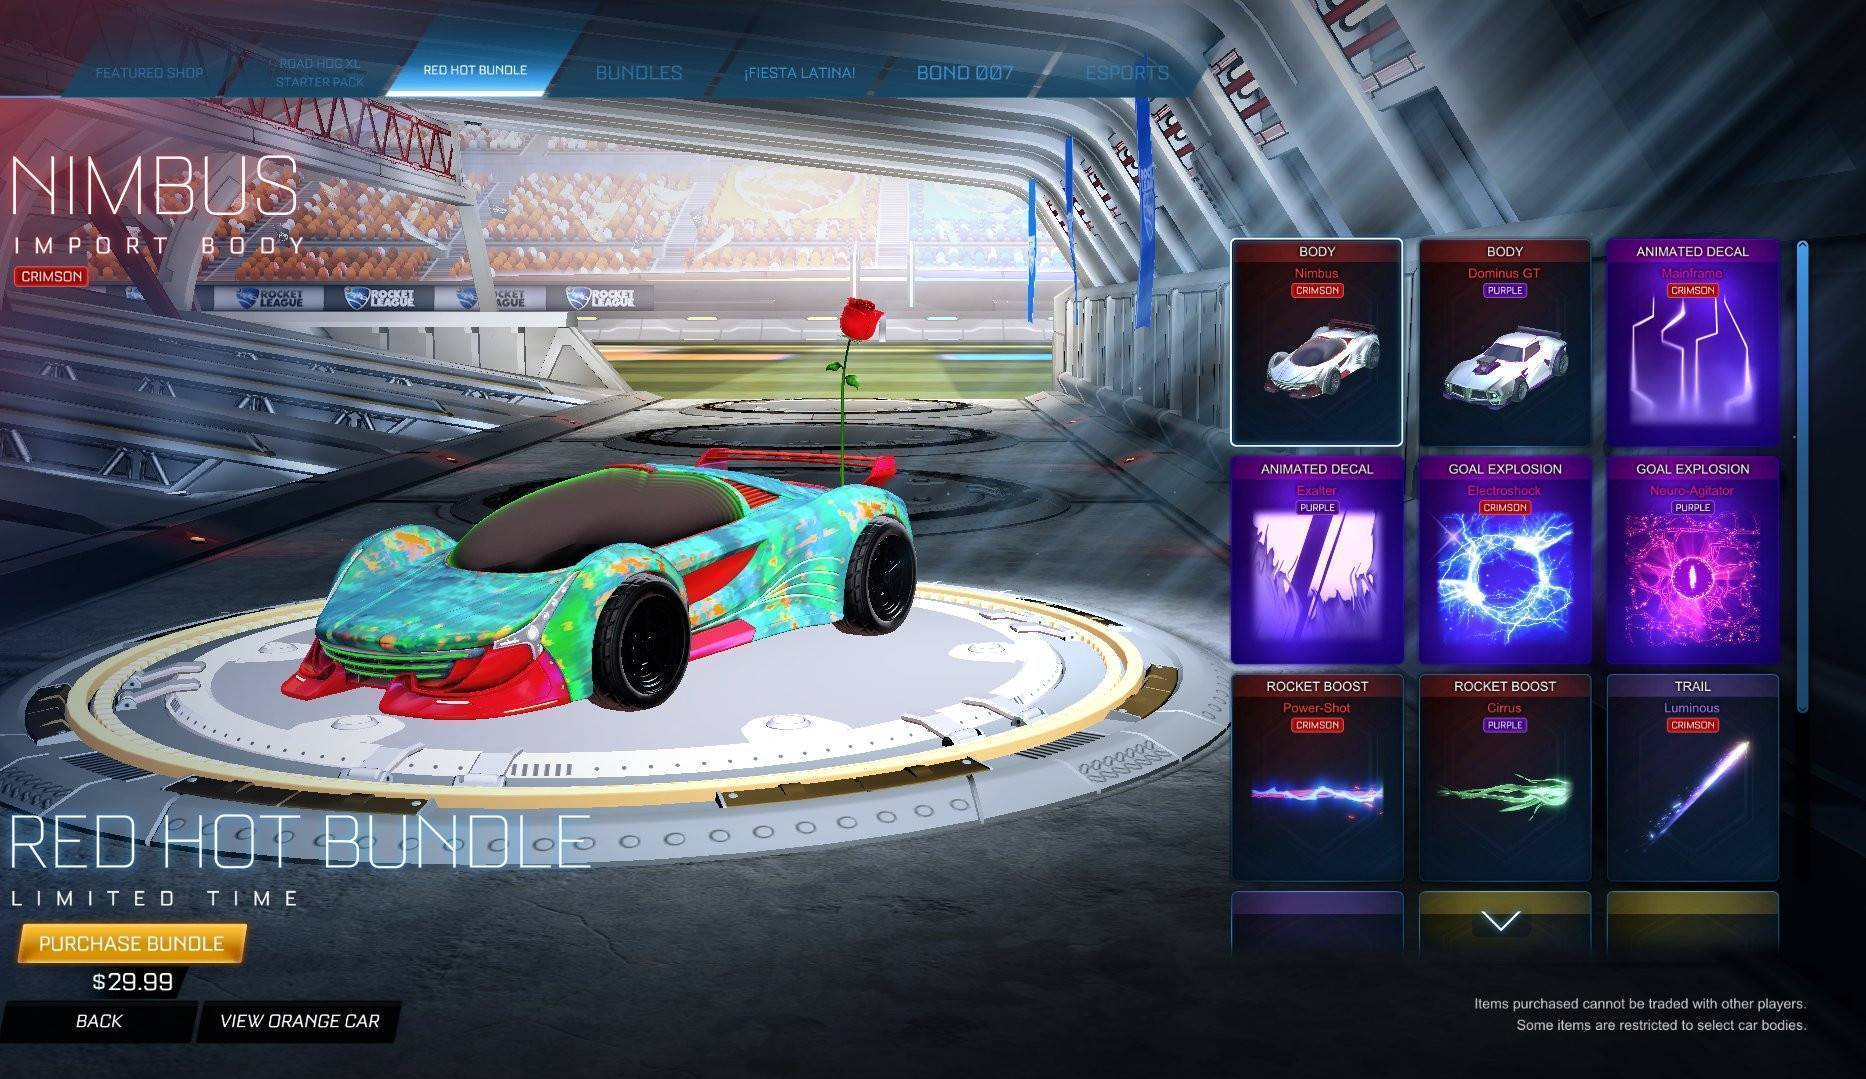 laundry Citizen Bowling Rocket League Red Hot Bundle (XBOX ONE) cheap - Price of $10.59